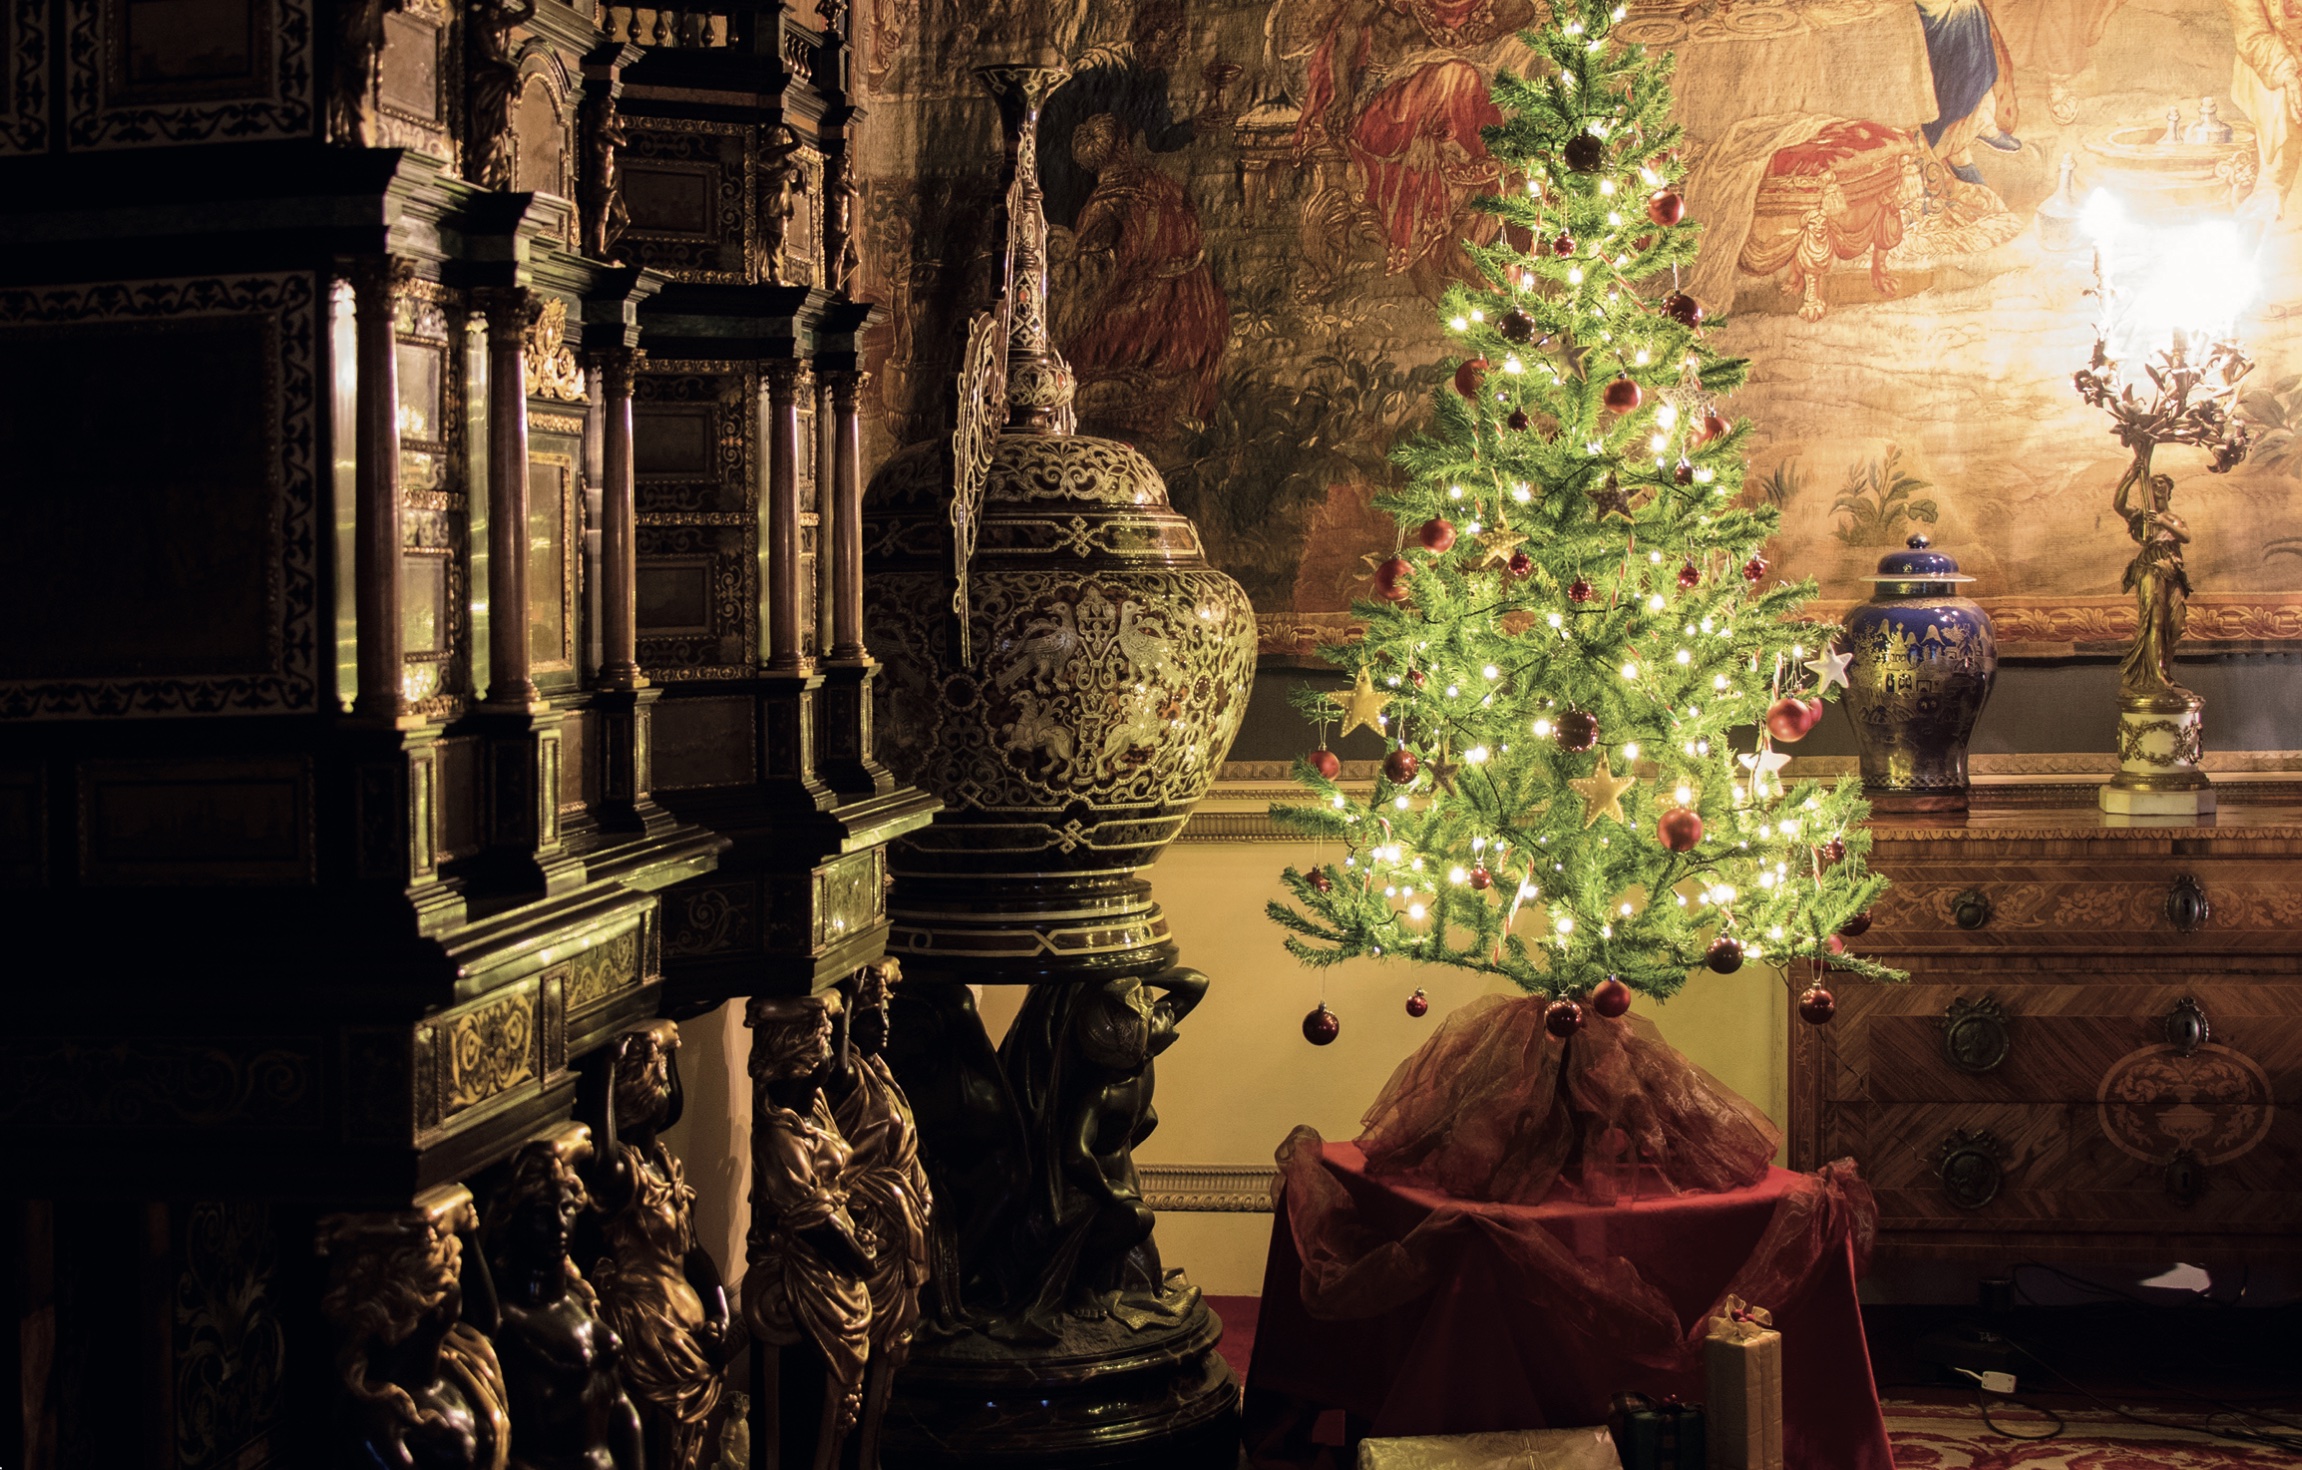 A Christmas interior in stately house